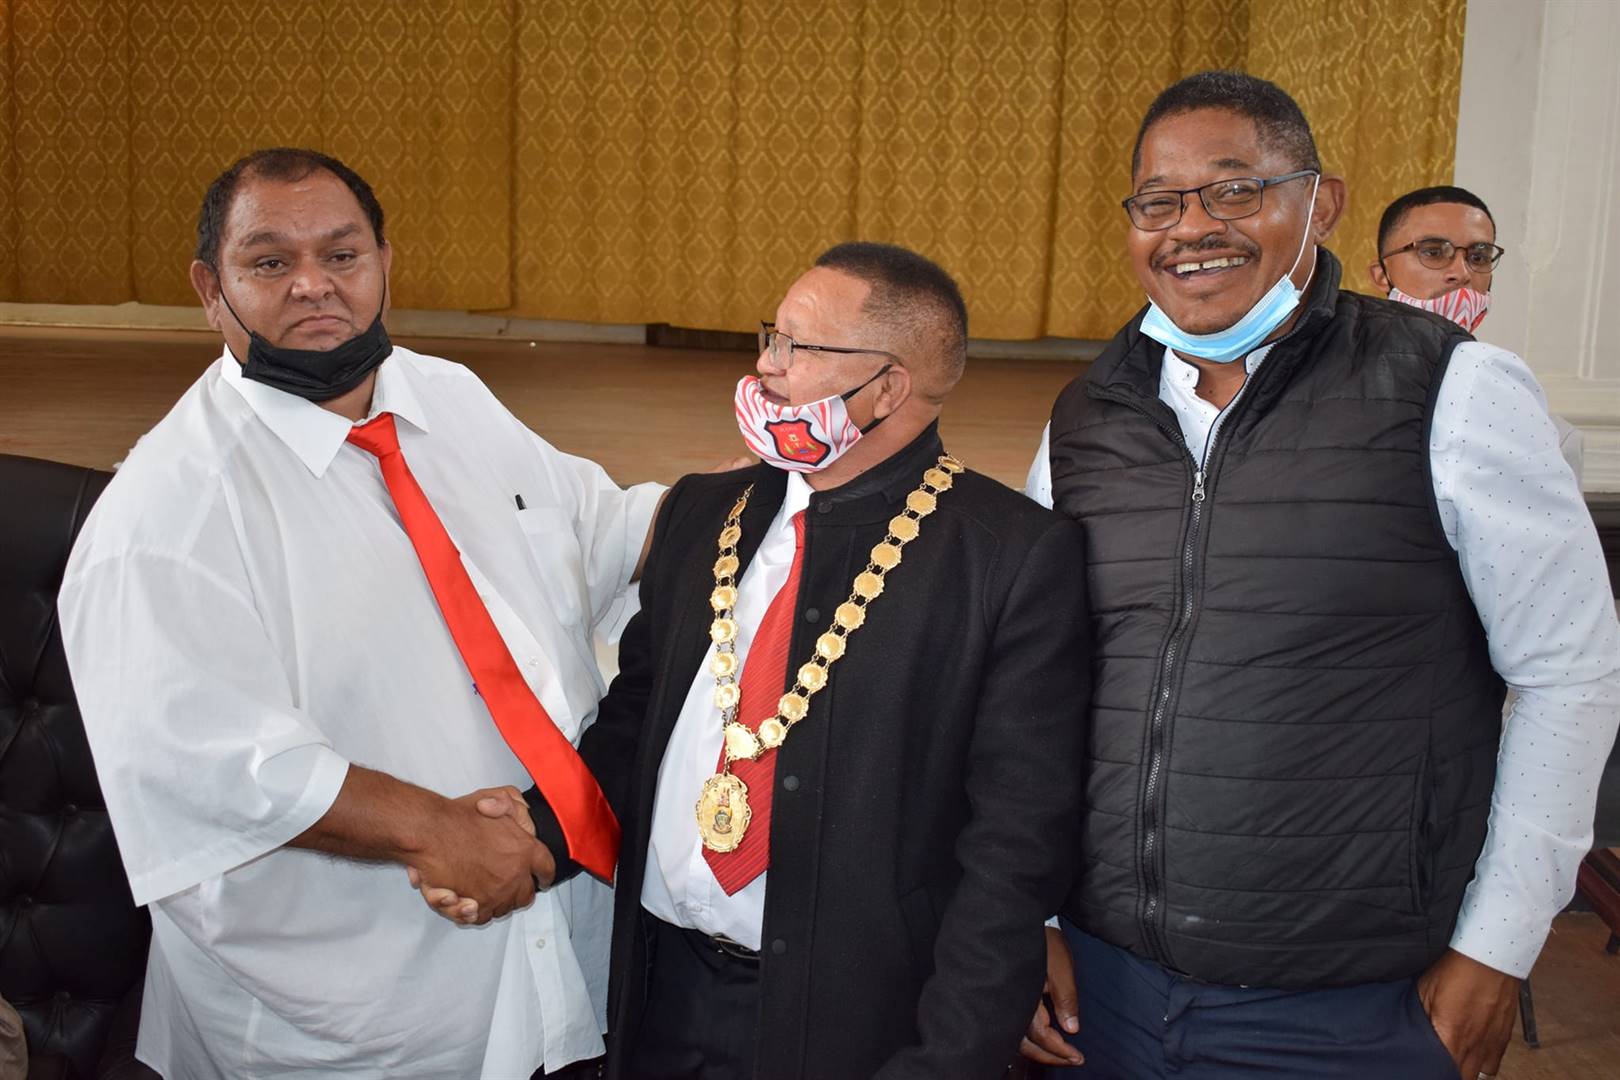 ICOSA councillor Hyrin Ruiters congratulates Jeffrey Donson with his election as Kannaland mayor, with his deputy, Werner Meshoa also in attendance.